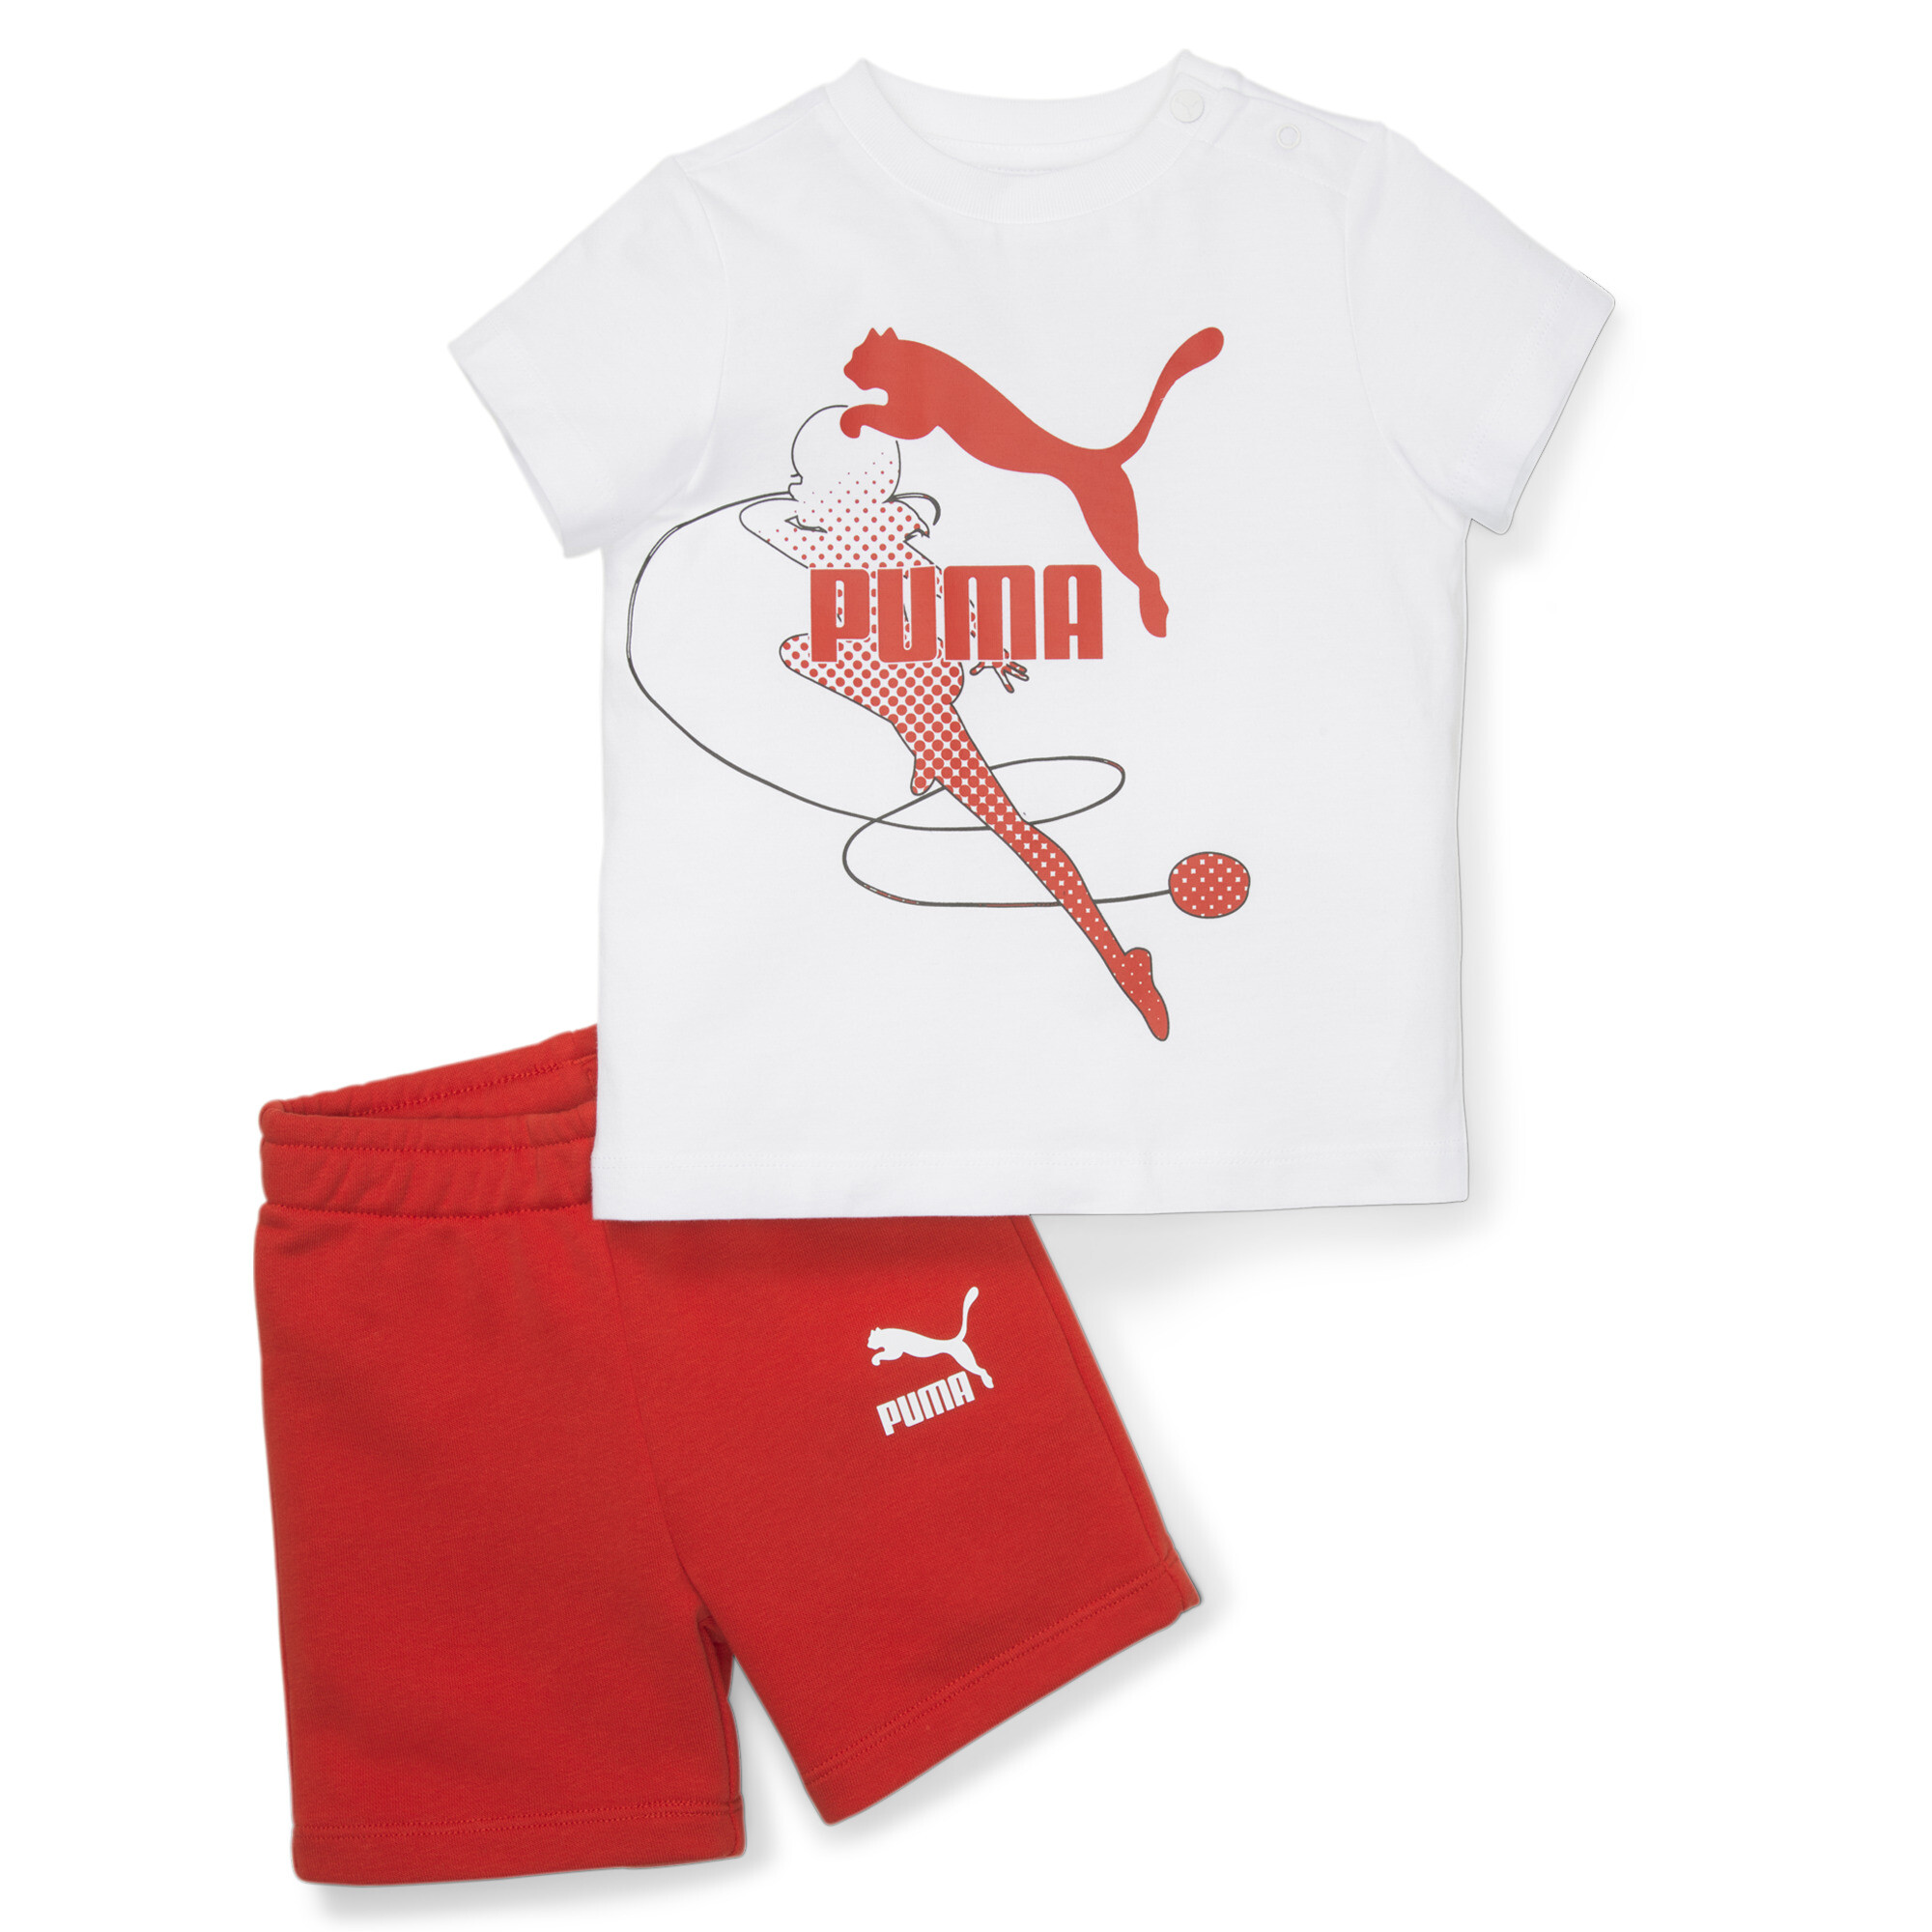 PUMA X MIRACULOUS Set Kids In White, Size 6-9 Months